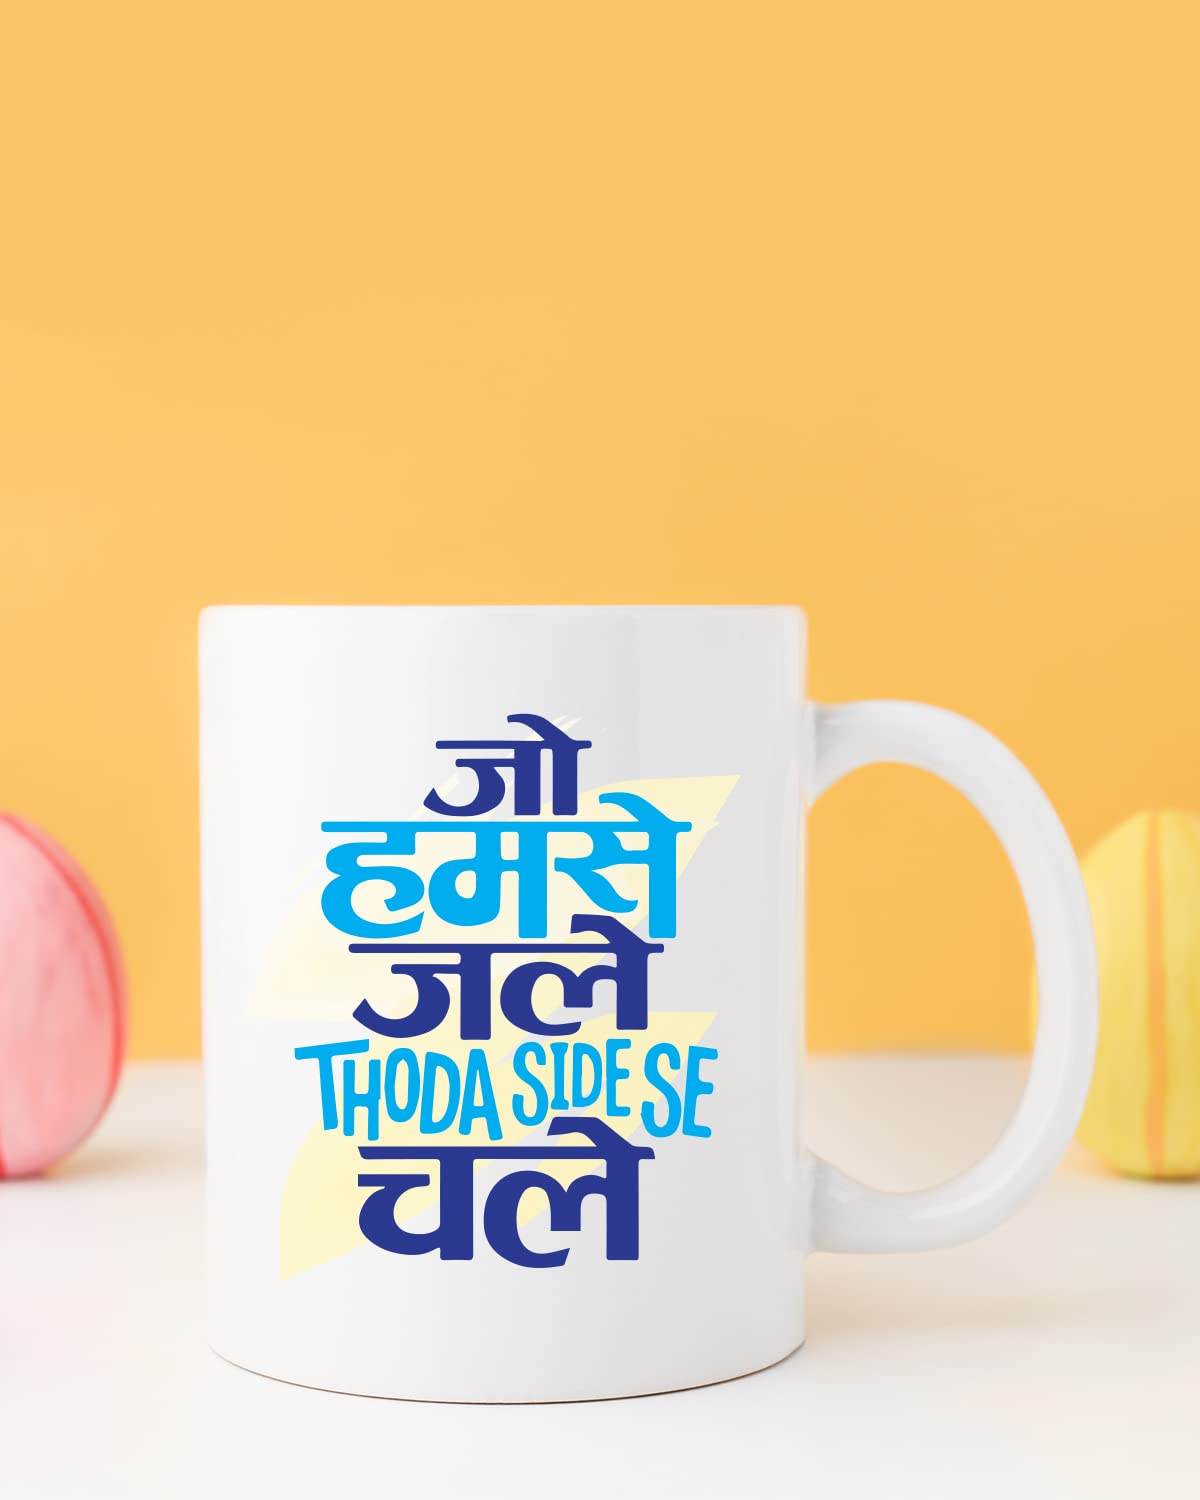 JO HUMSE CHALE Coffee Mug - Gift for Friend, Birthday Gift, Birthday Mug, Motivational Quotes Mug, Mugs with Funny & Funky Dialogues, Bollywood Mugs, Funny Mugs for Him & Her